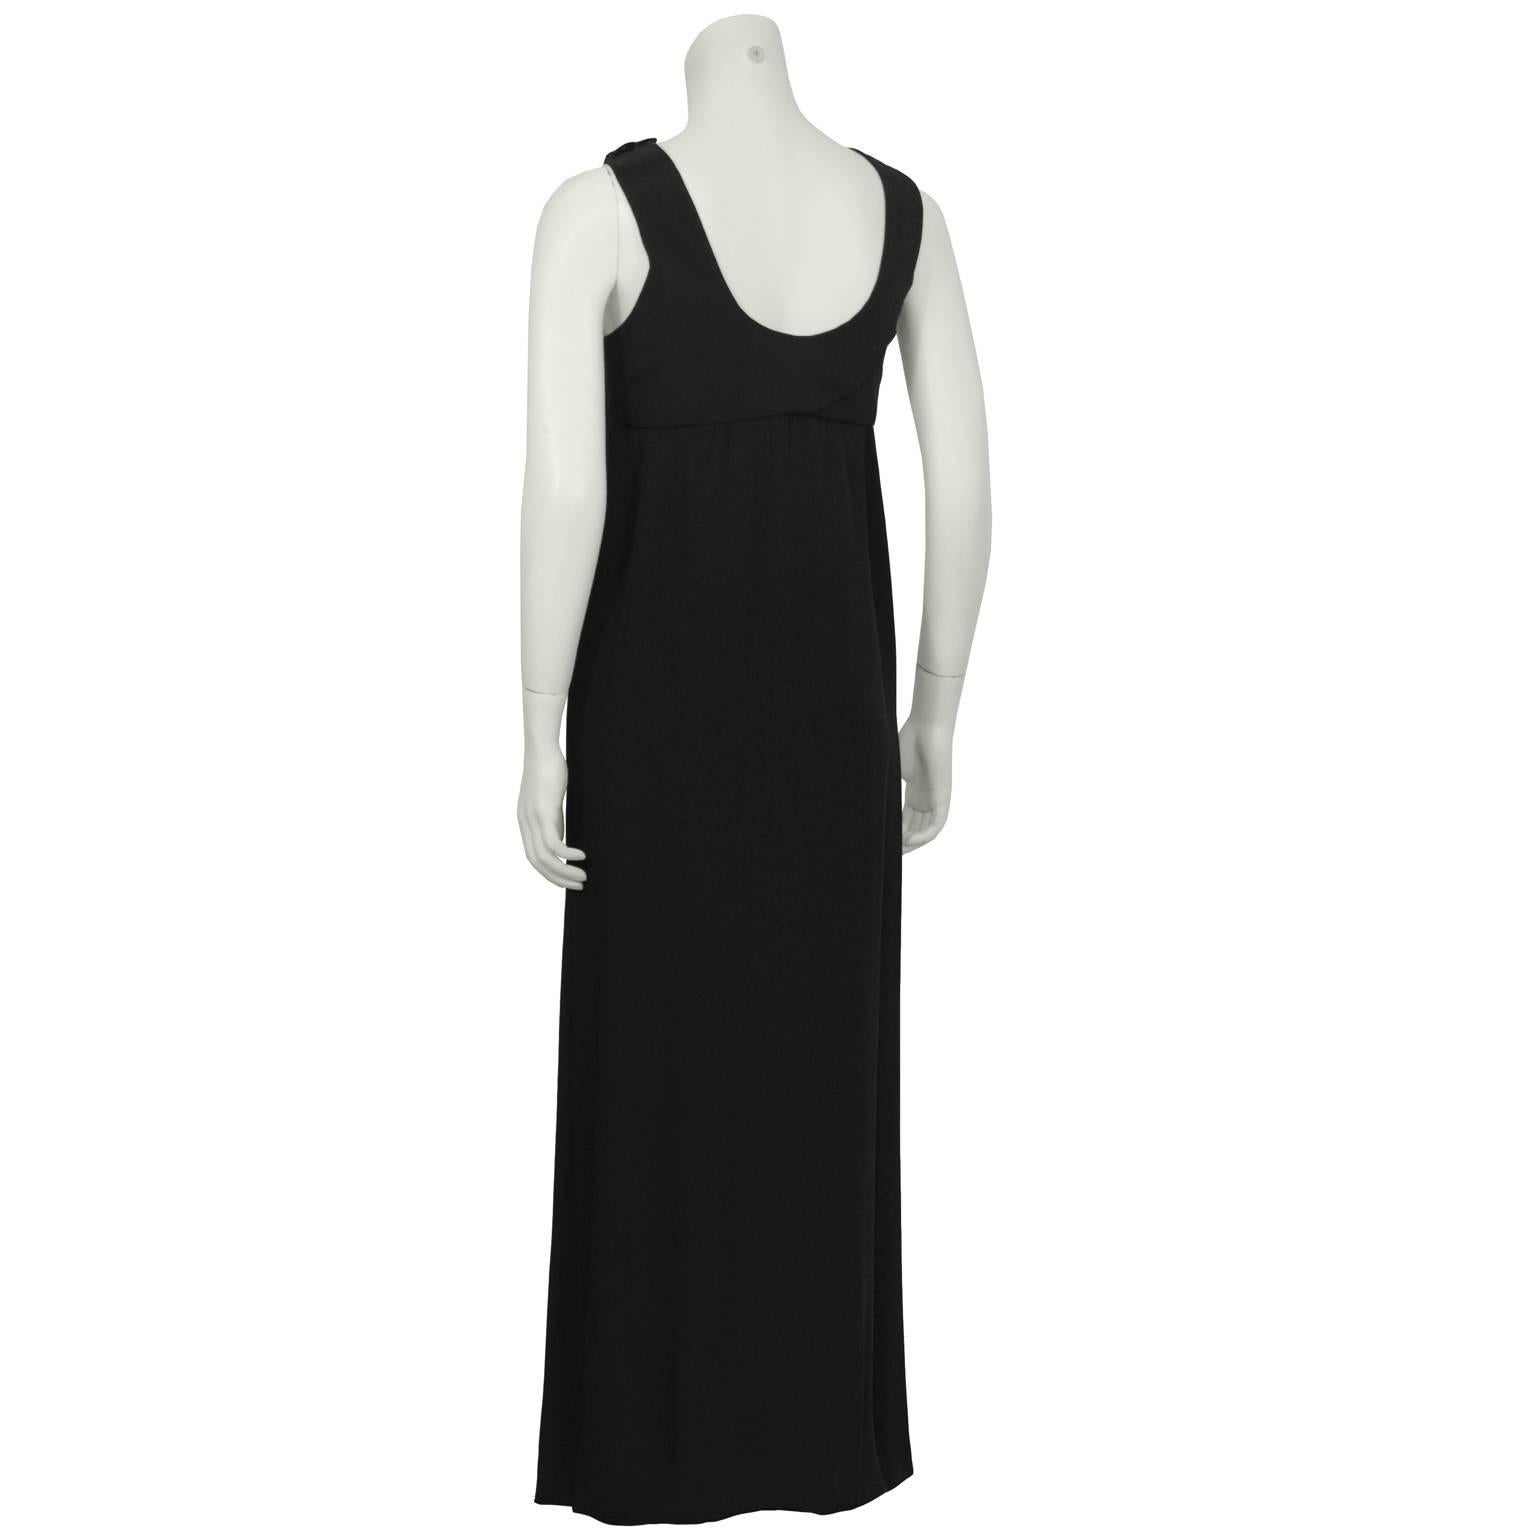 1970's Anonymous Simple Black Gown In Excellent Condition For Sale In Toronto, Ontario